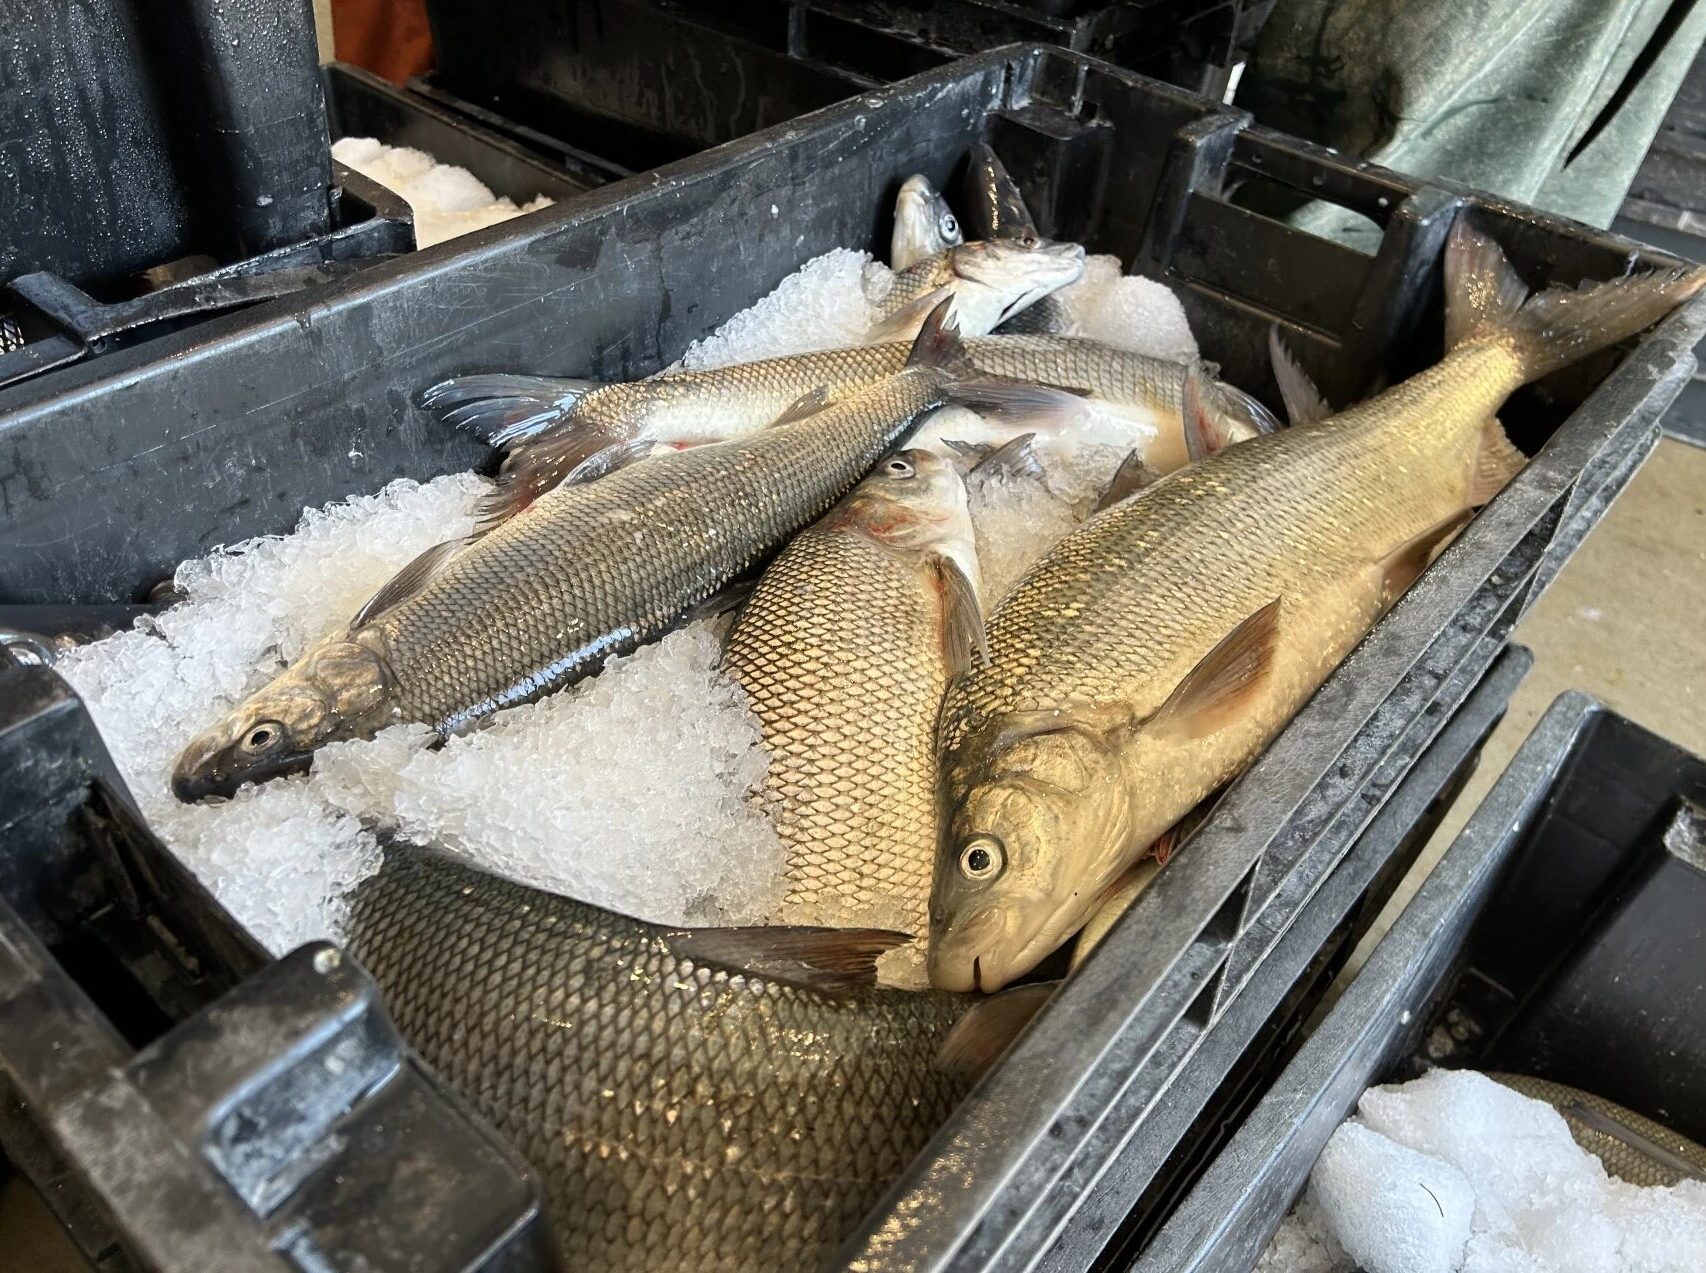 White fish on a bed of ice in a metal tub